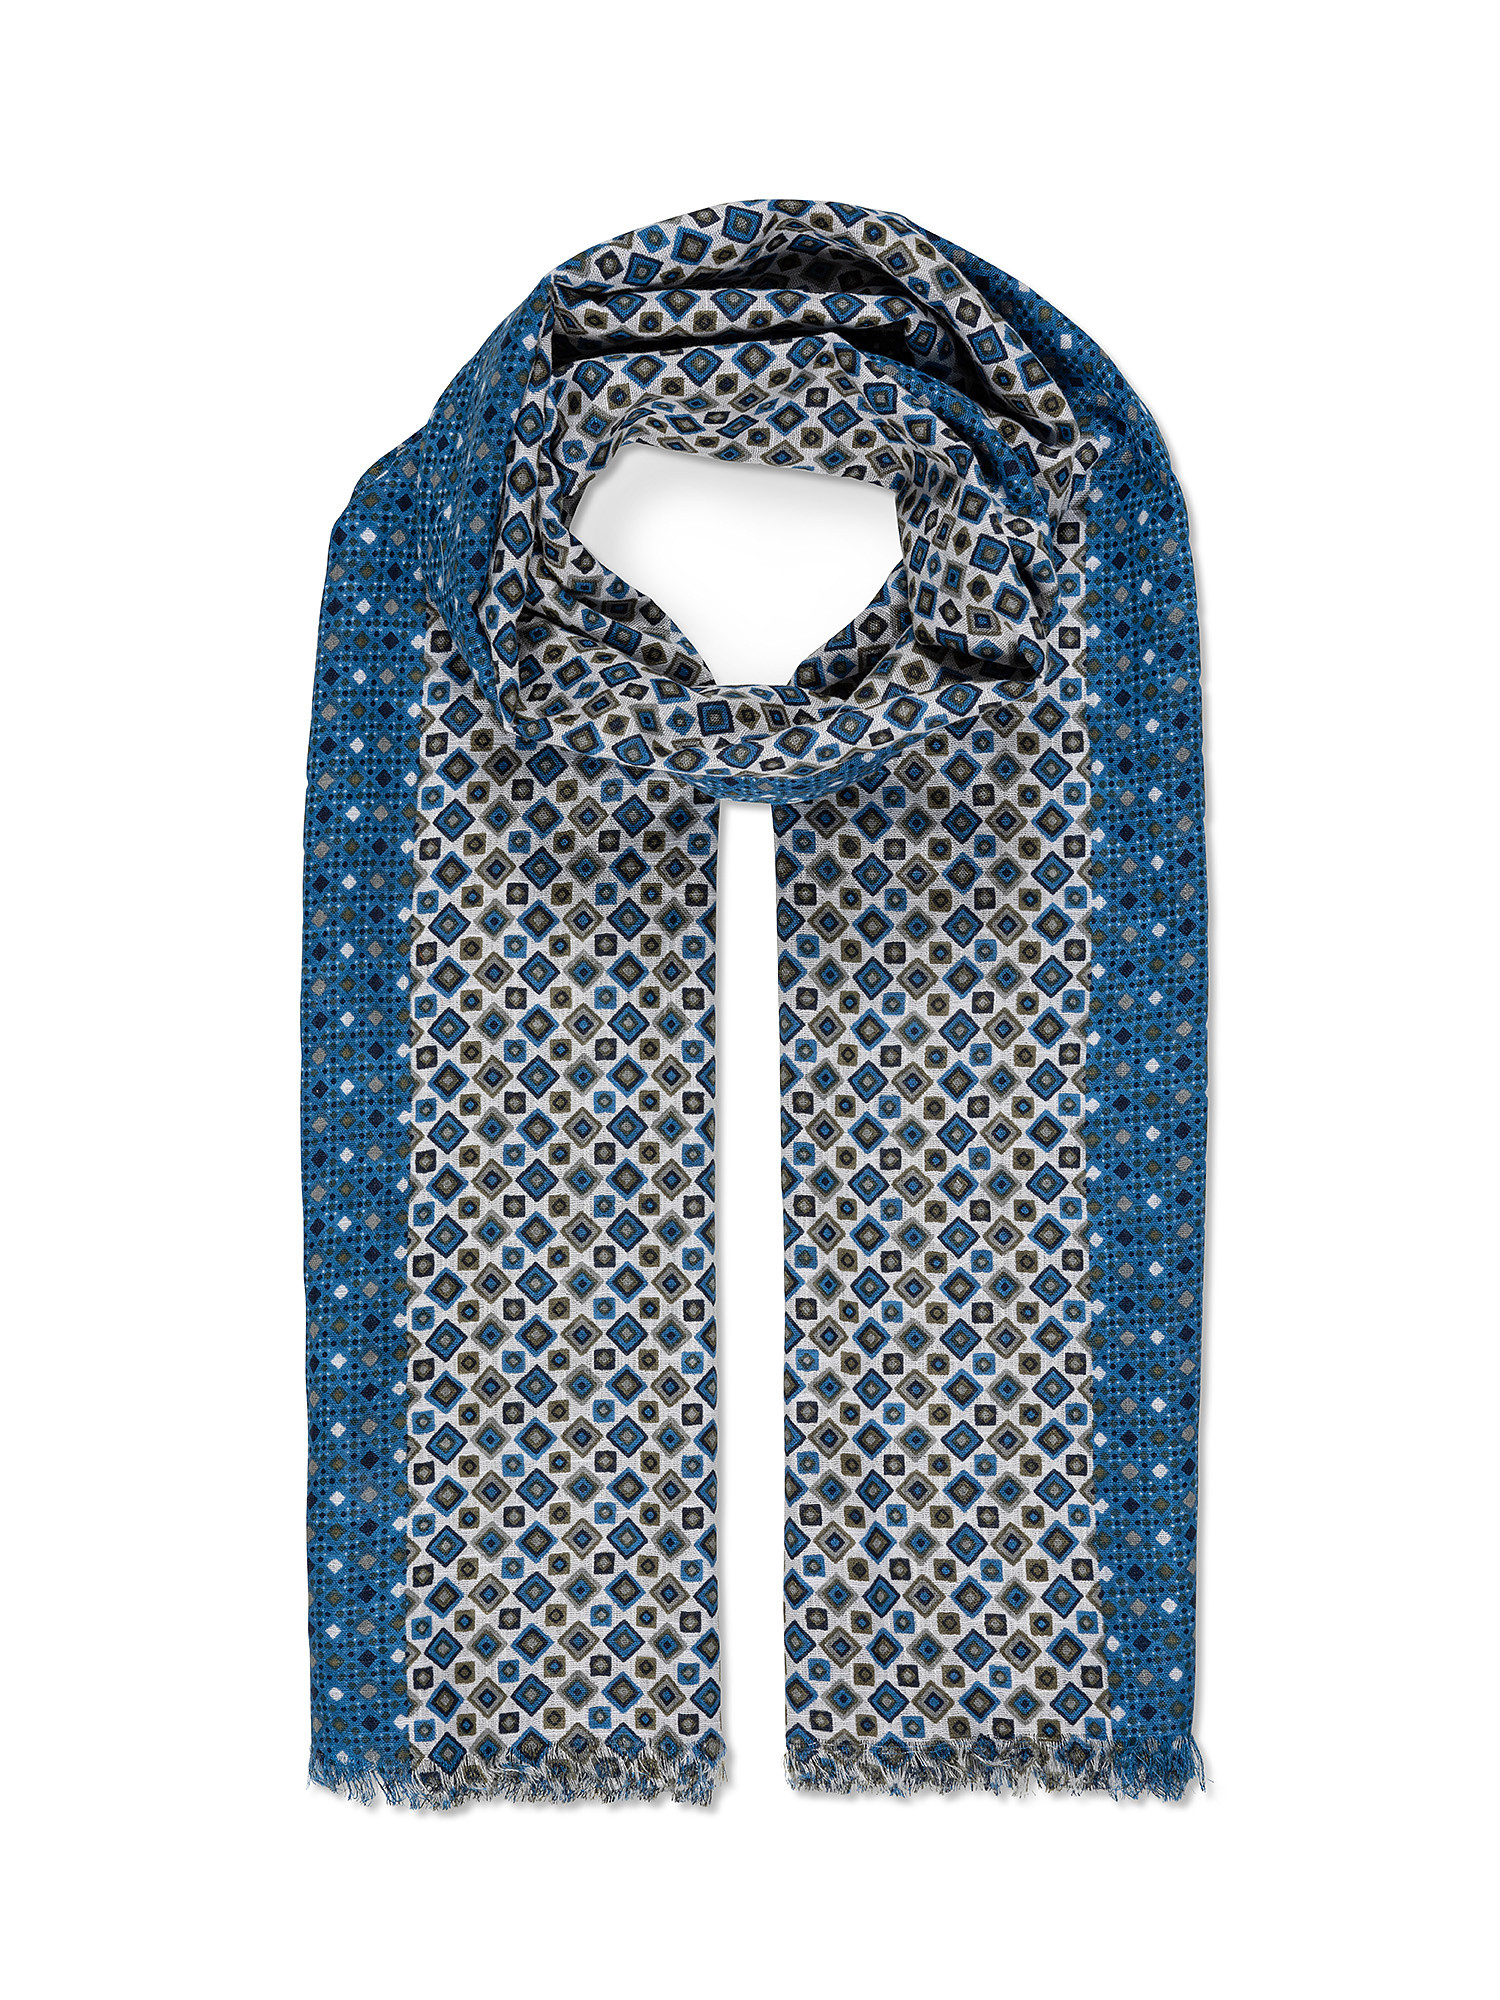 Luca D'Altieri - Scarf with geometric pattern, Blue, large image number 0